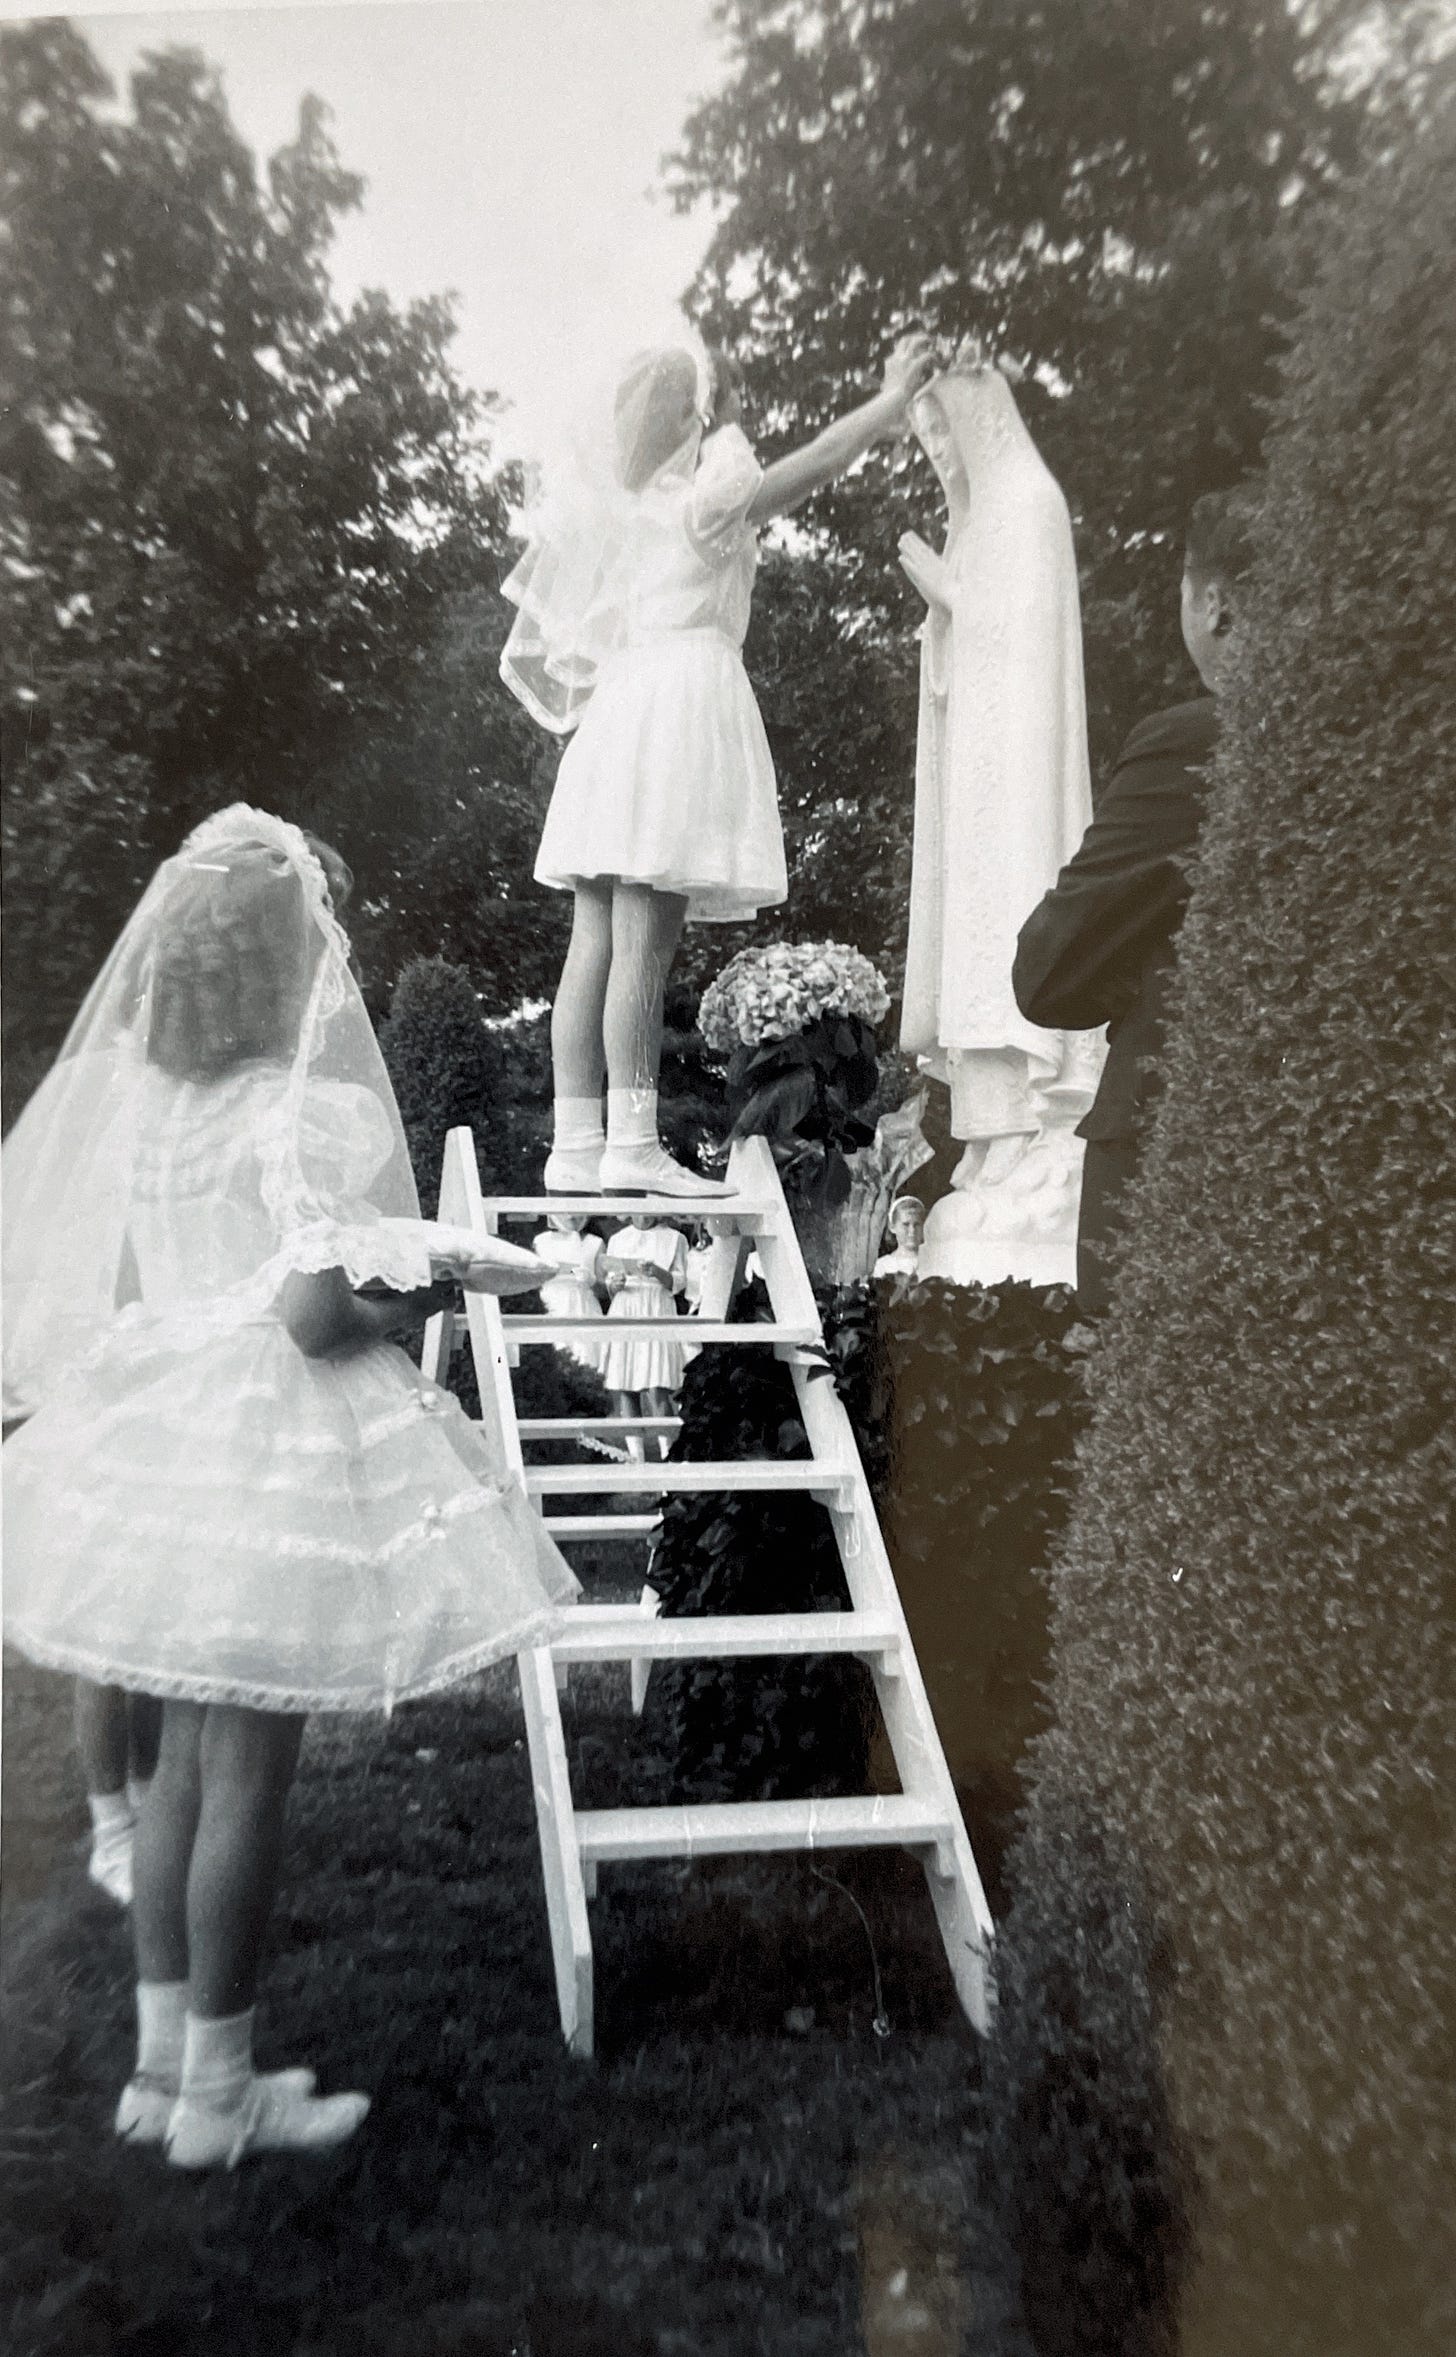 A seven year girl dressed in a white first communion dress and veil, standing on a ladder crowning the May Queen, with another girl similarly dressed holds a pillow for the crown 